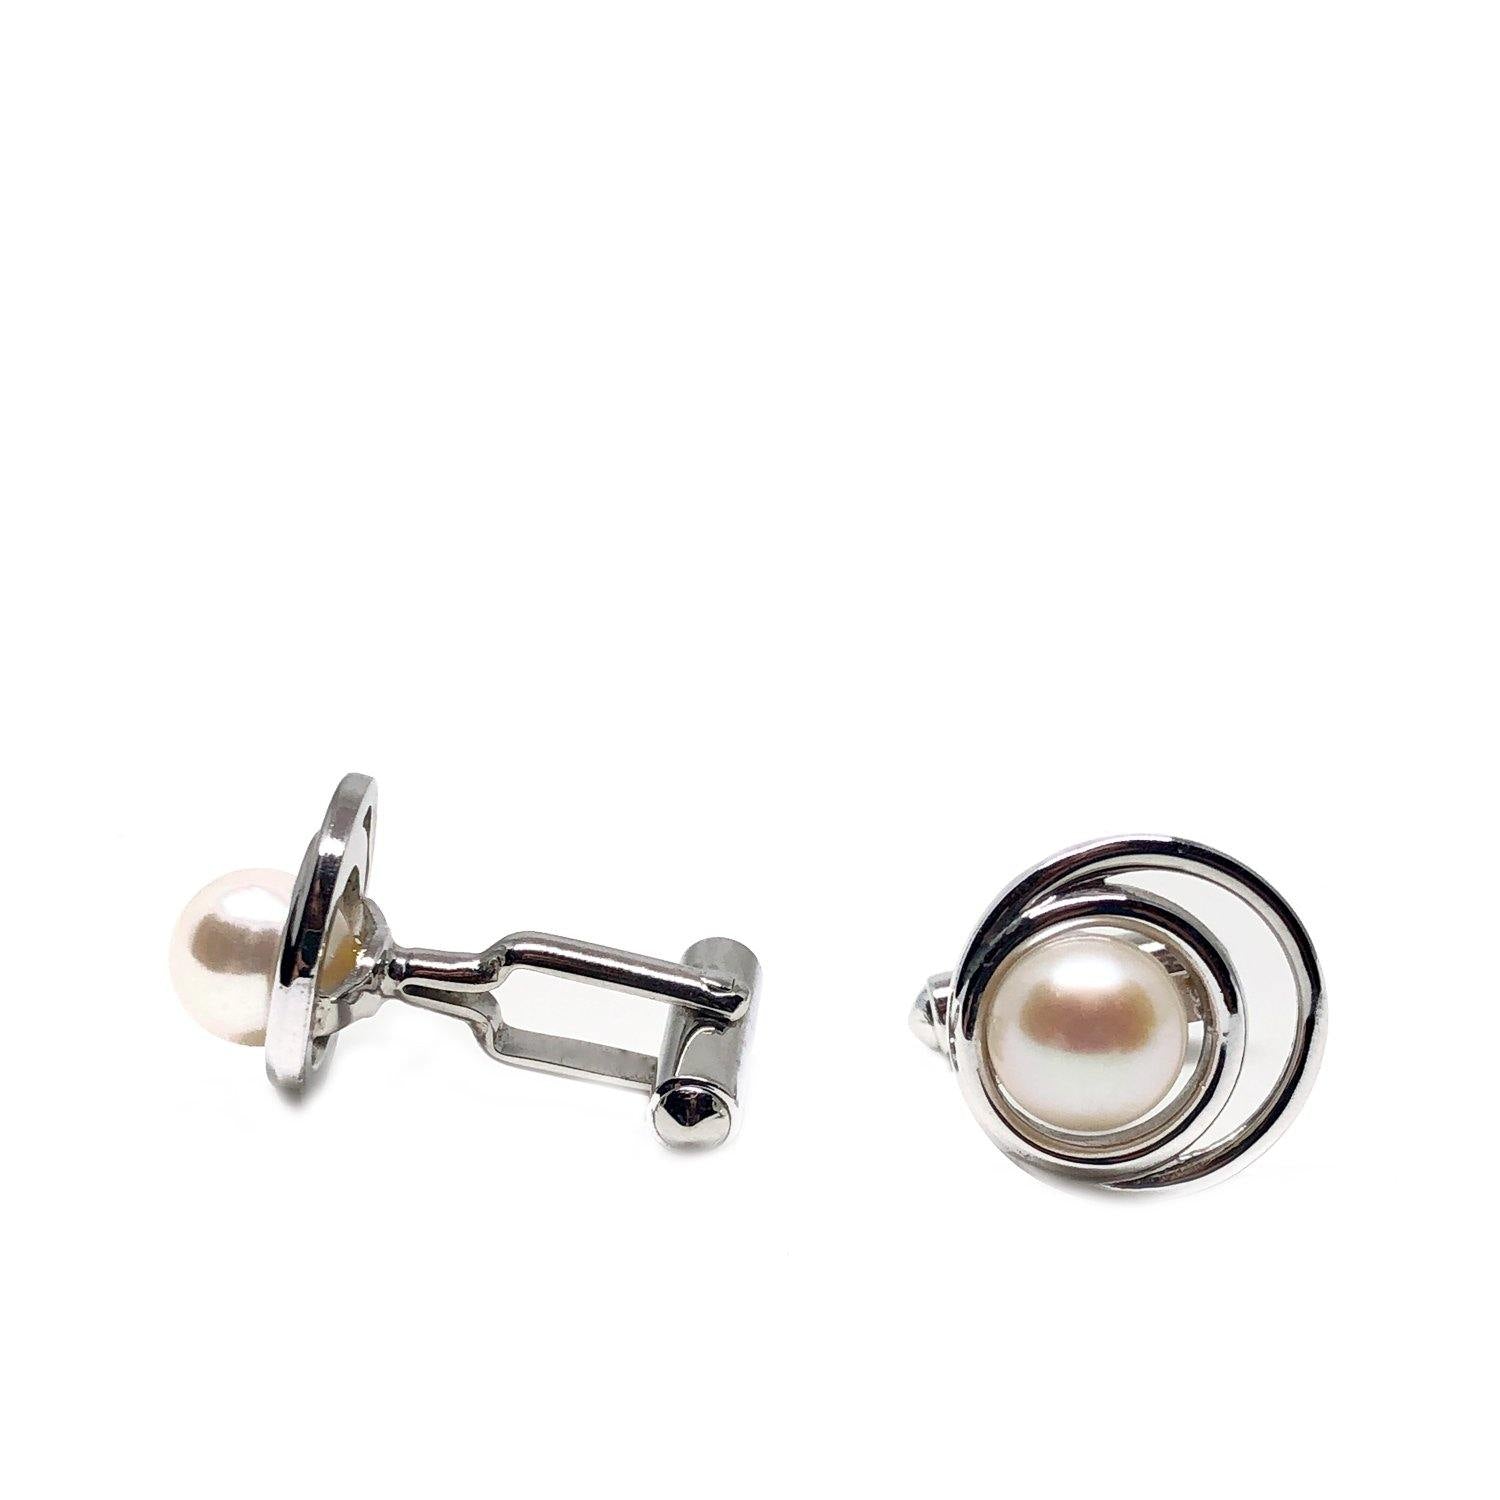 Circle Modernist Japanese Cultured Akoya Pearl Round Cufflinks- Sterling Silver